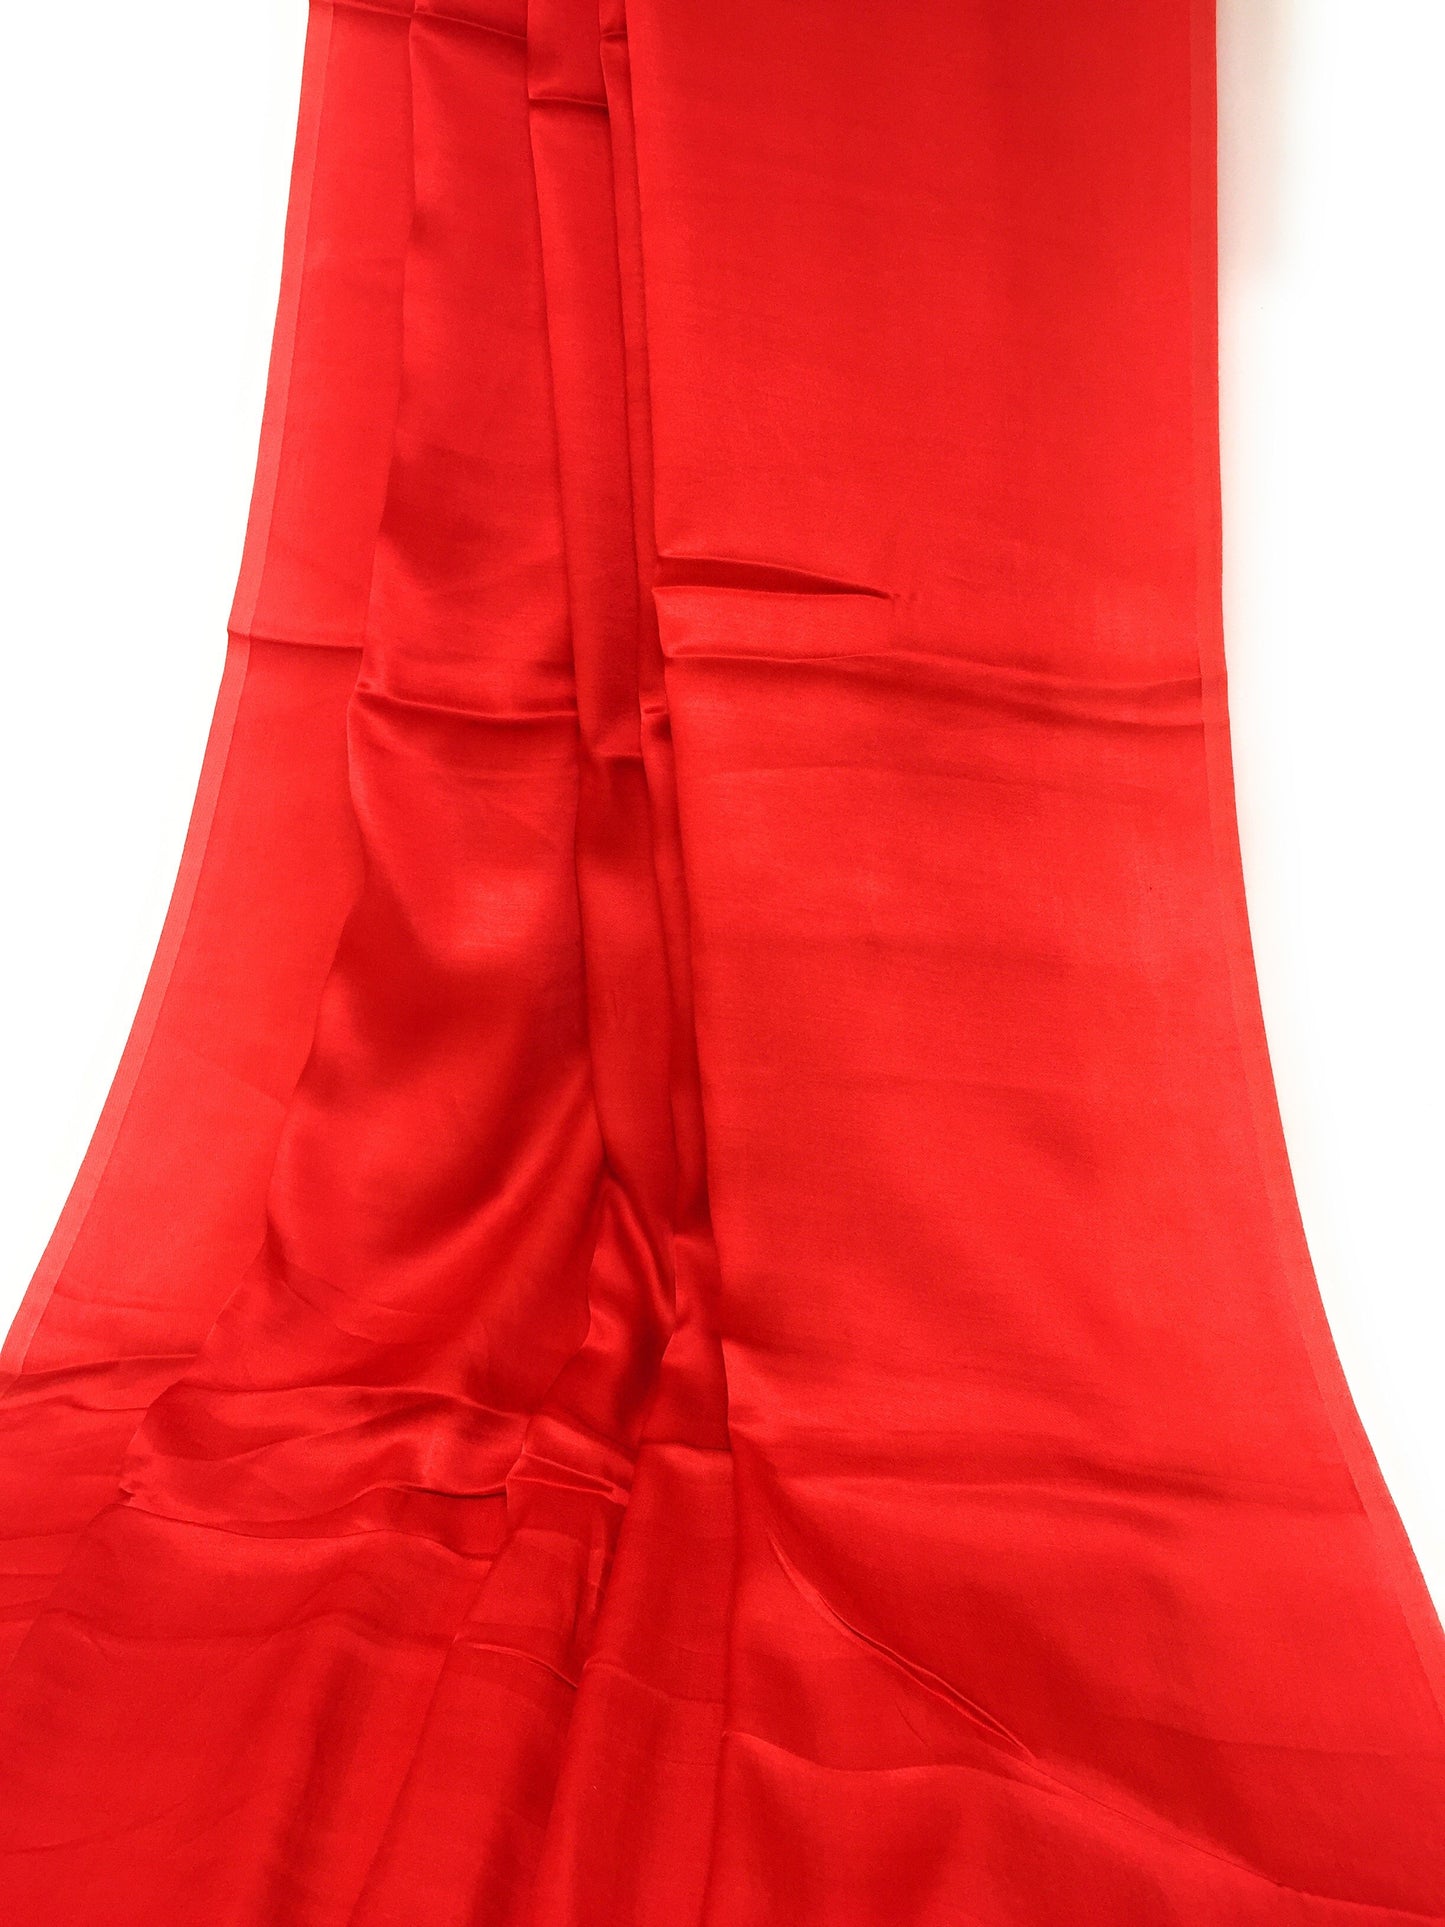 Pure Red Silk Fabric Material  